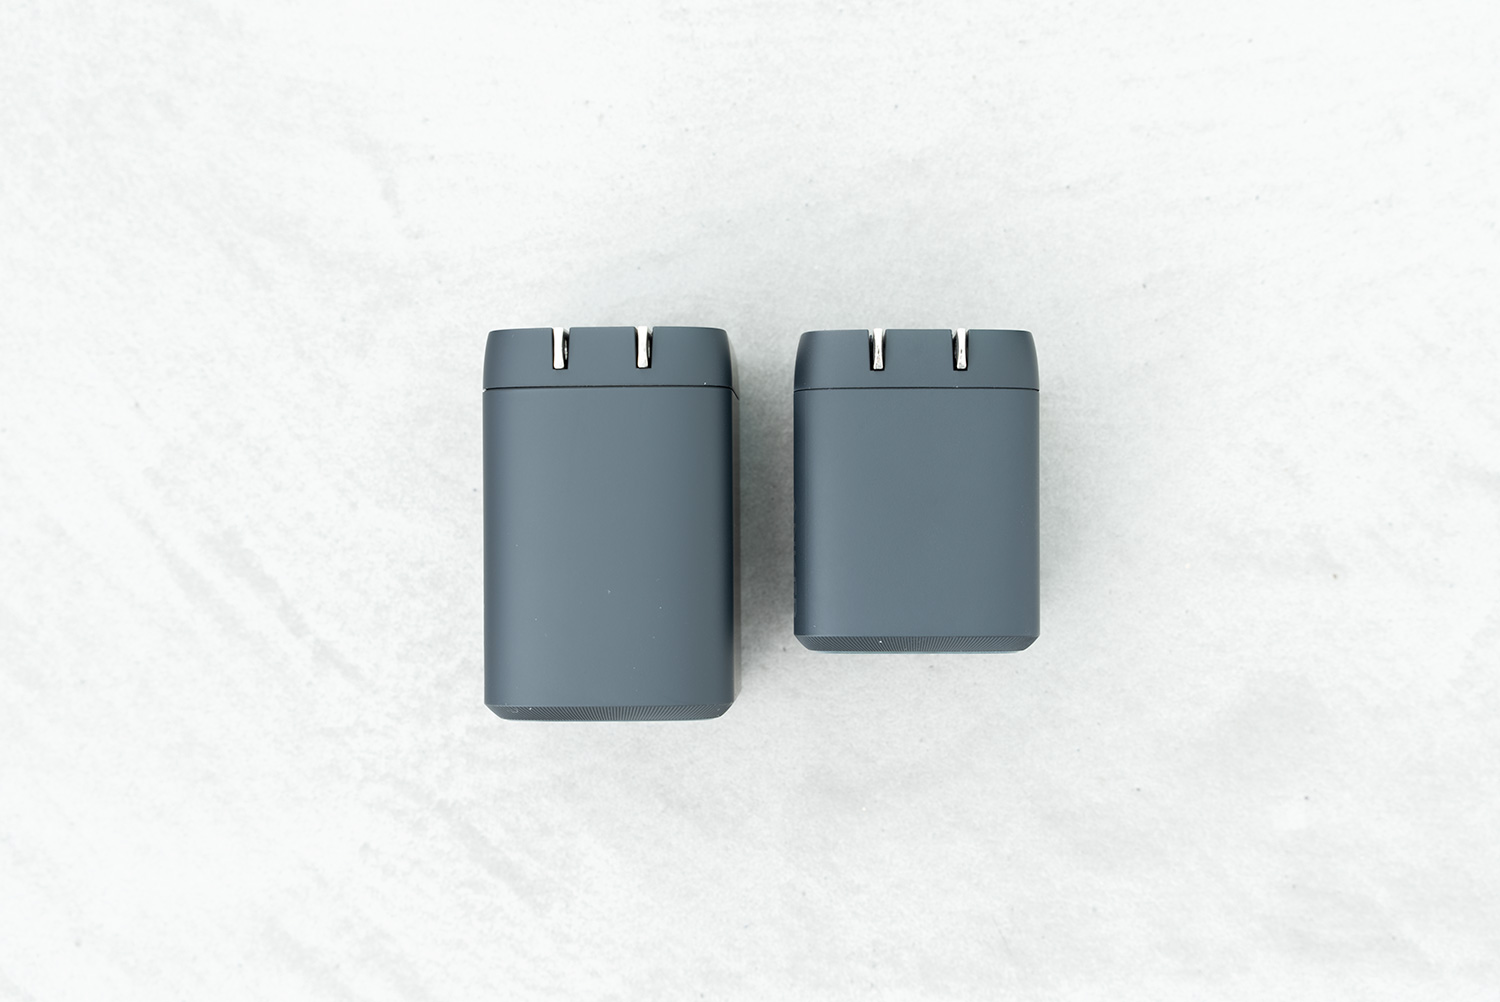 Anker Prime Wall Charger (67W, 3 ports, GaN)とのサイズ比較